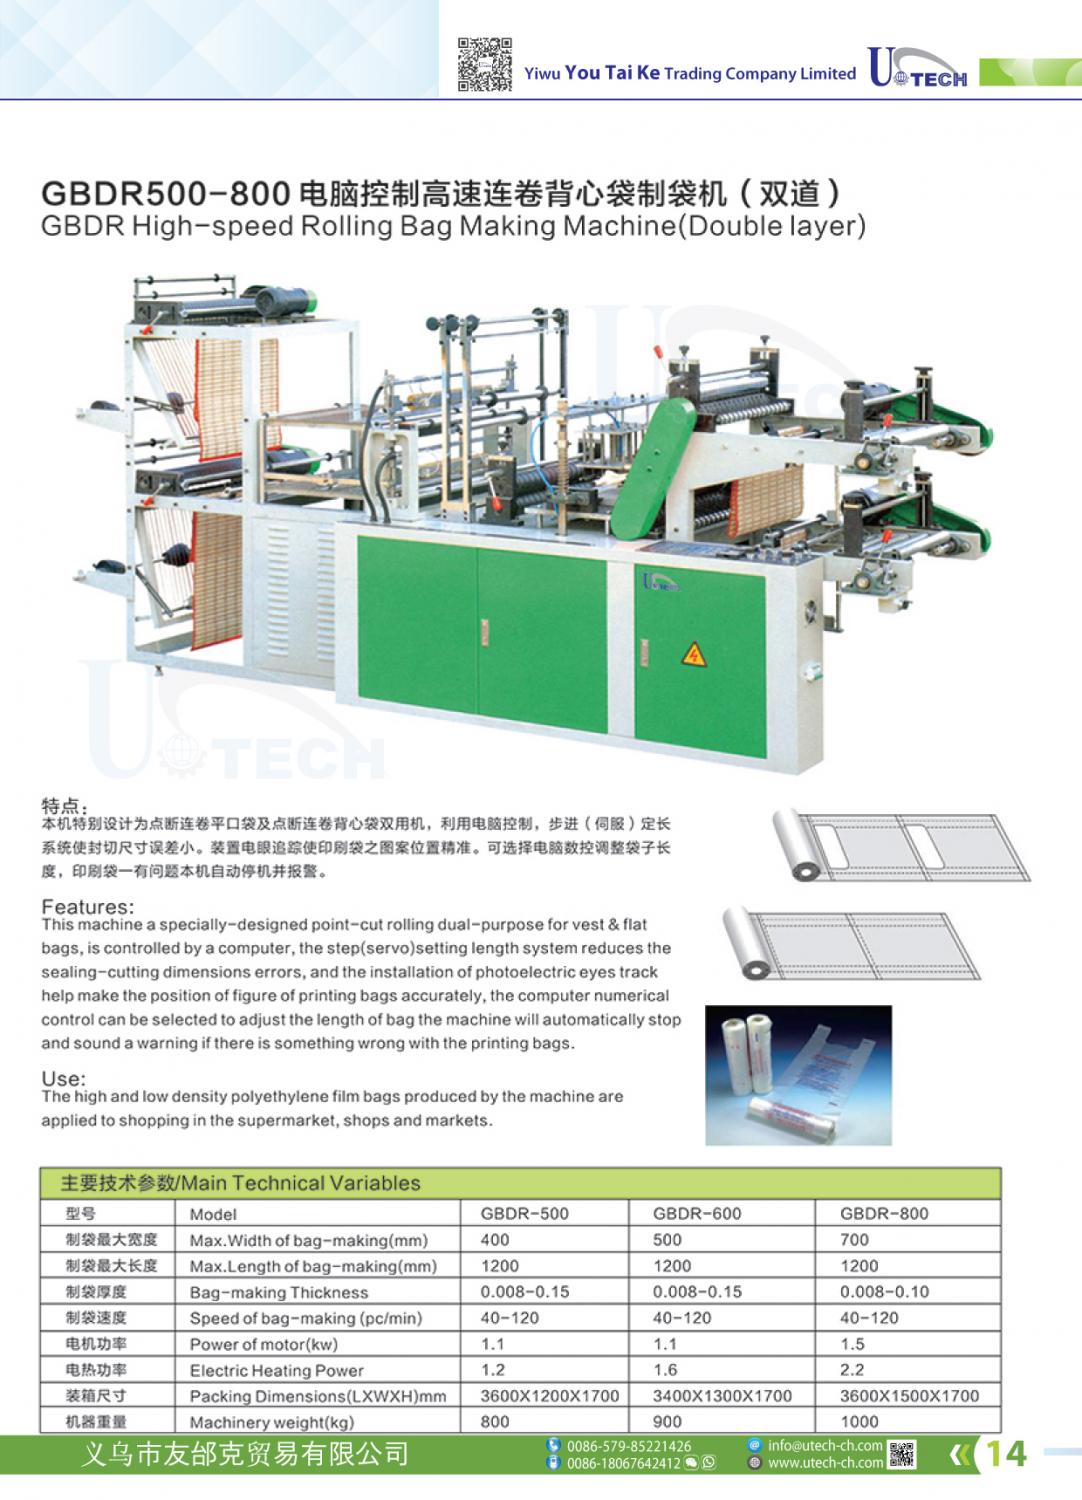 GBDR High-speed Rolling Bag Making Machine (Double layer)